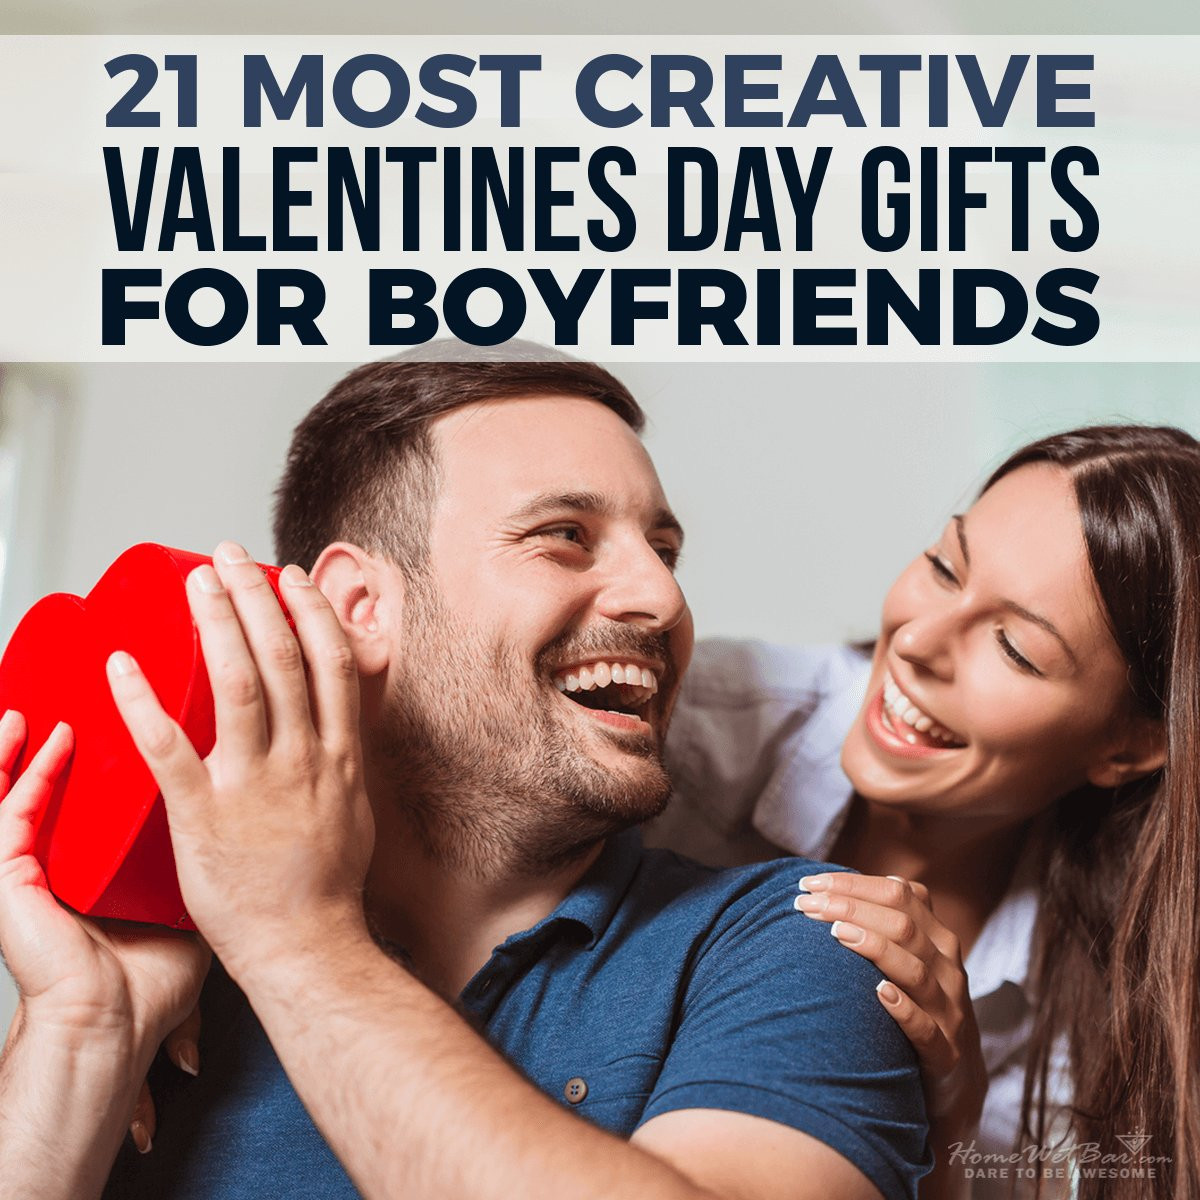 Clever Valentines Day Gifts
 21 Most Creative Valentine’s Day Gifts for Boyfriends